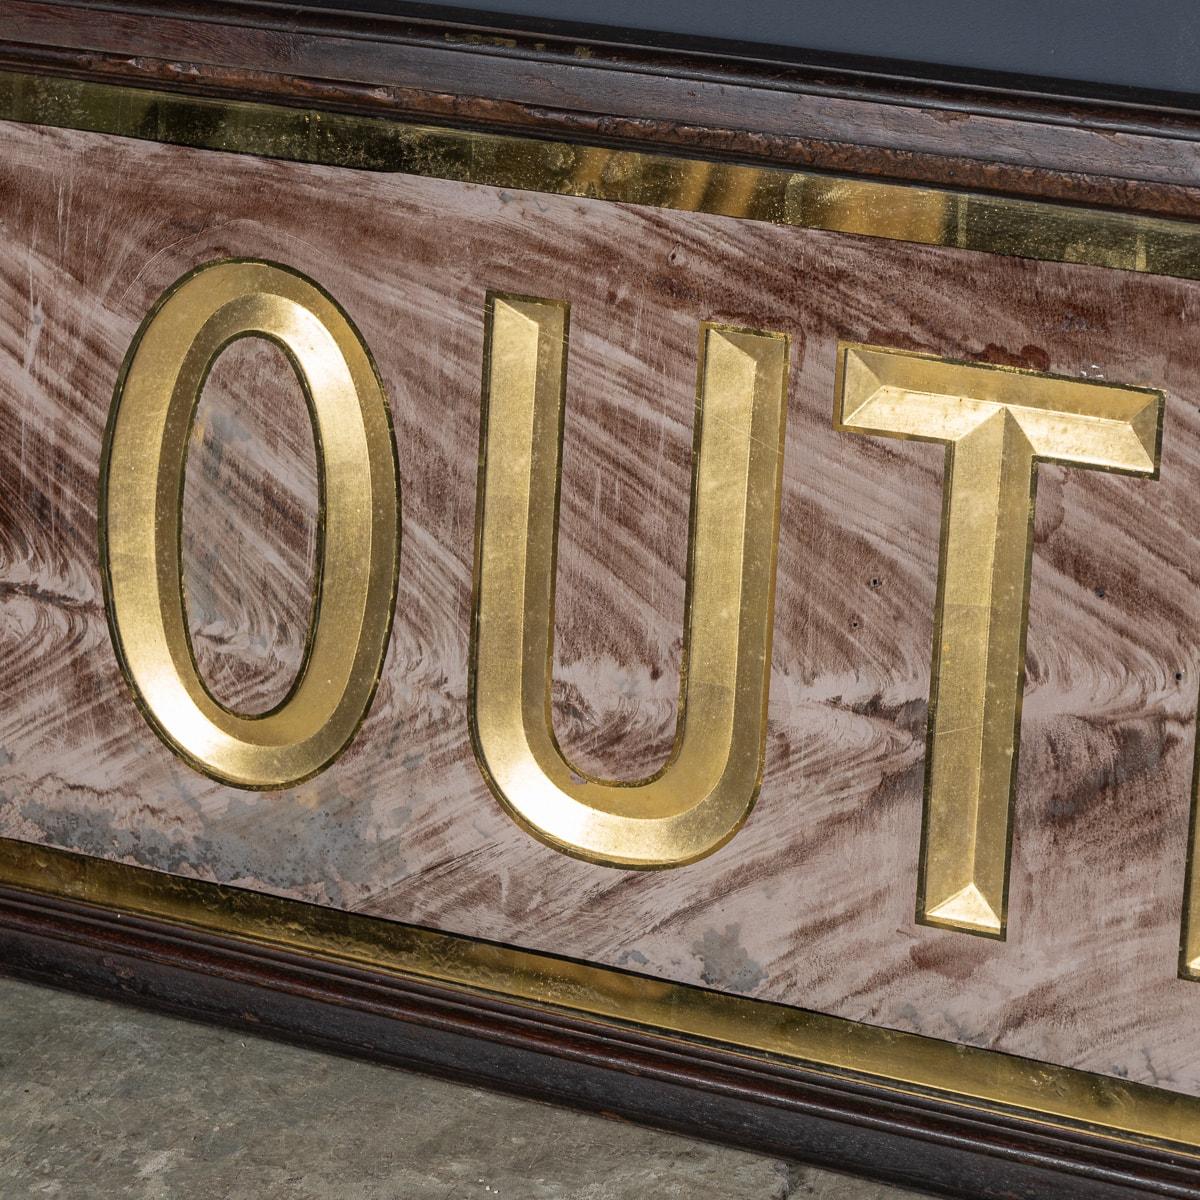 Antique 20th Century Victorian Mirrored Outfitting Sign For Harris Tweed c.1900 For Sale 1